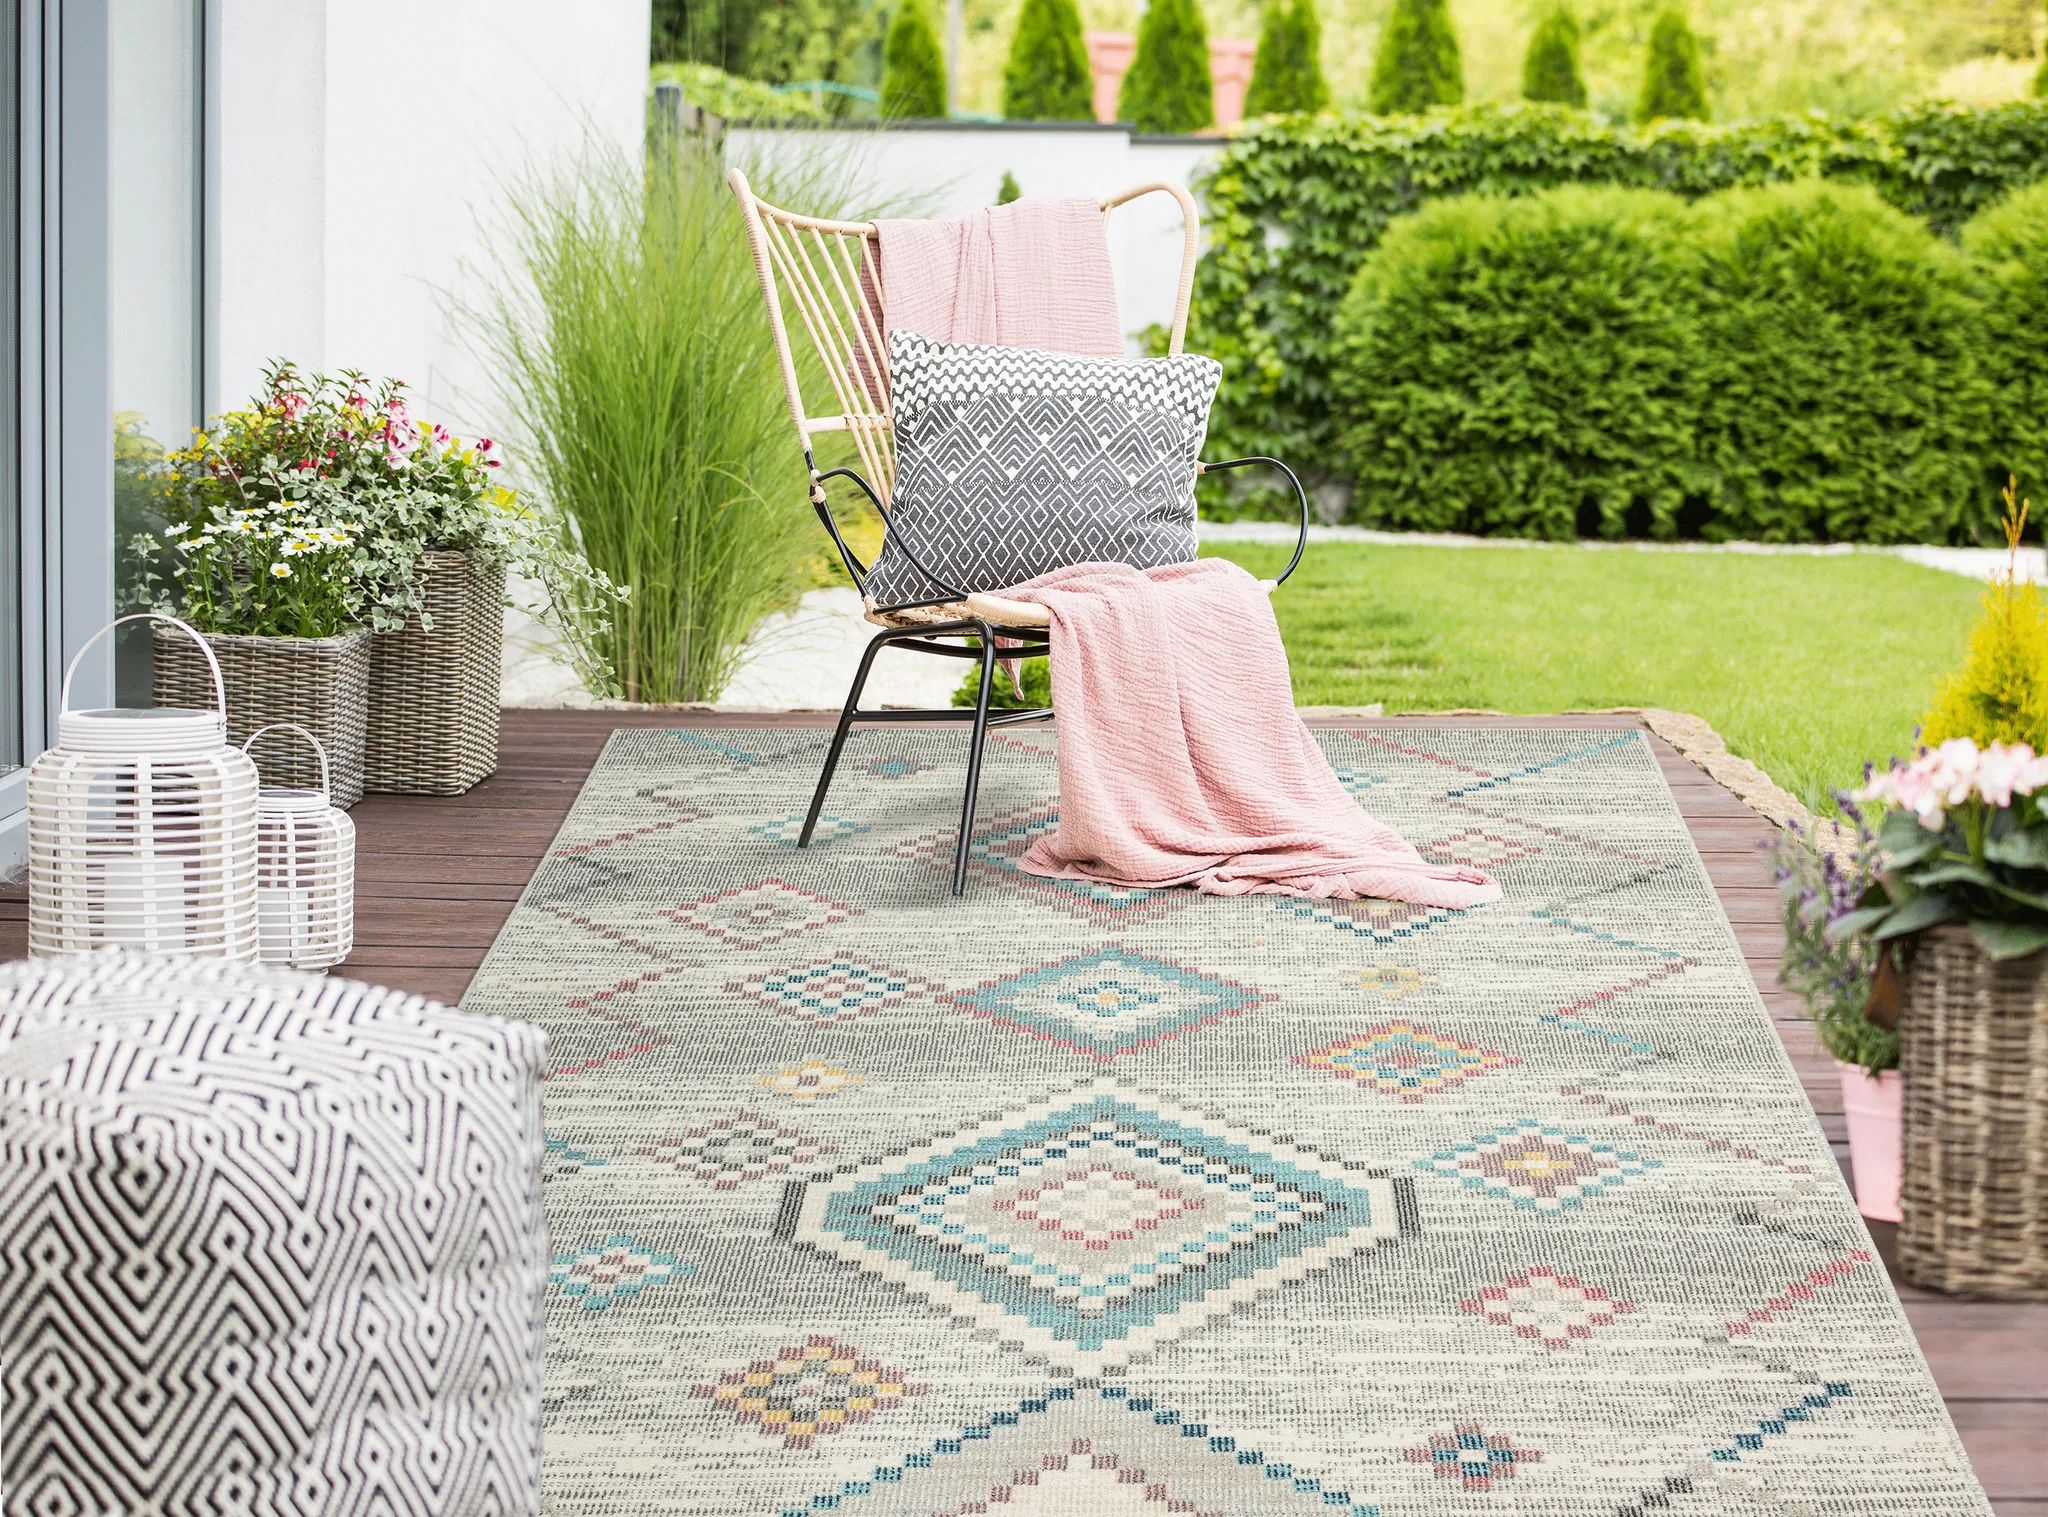 the carpet Palma - Teppich, Outdoor robuster